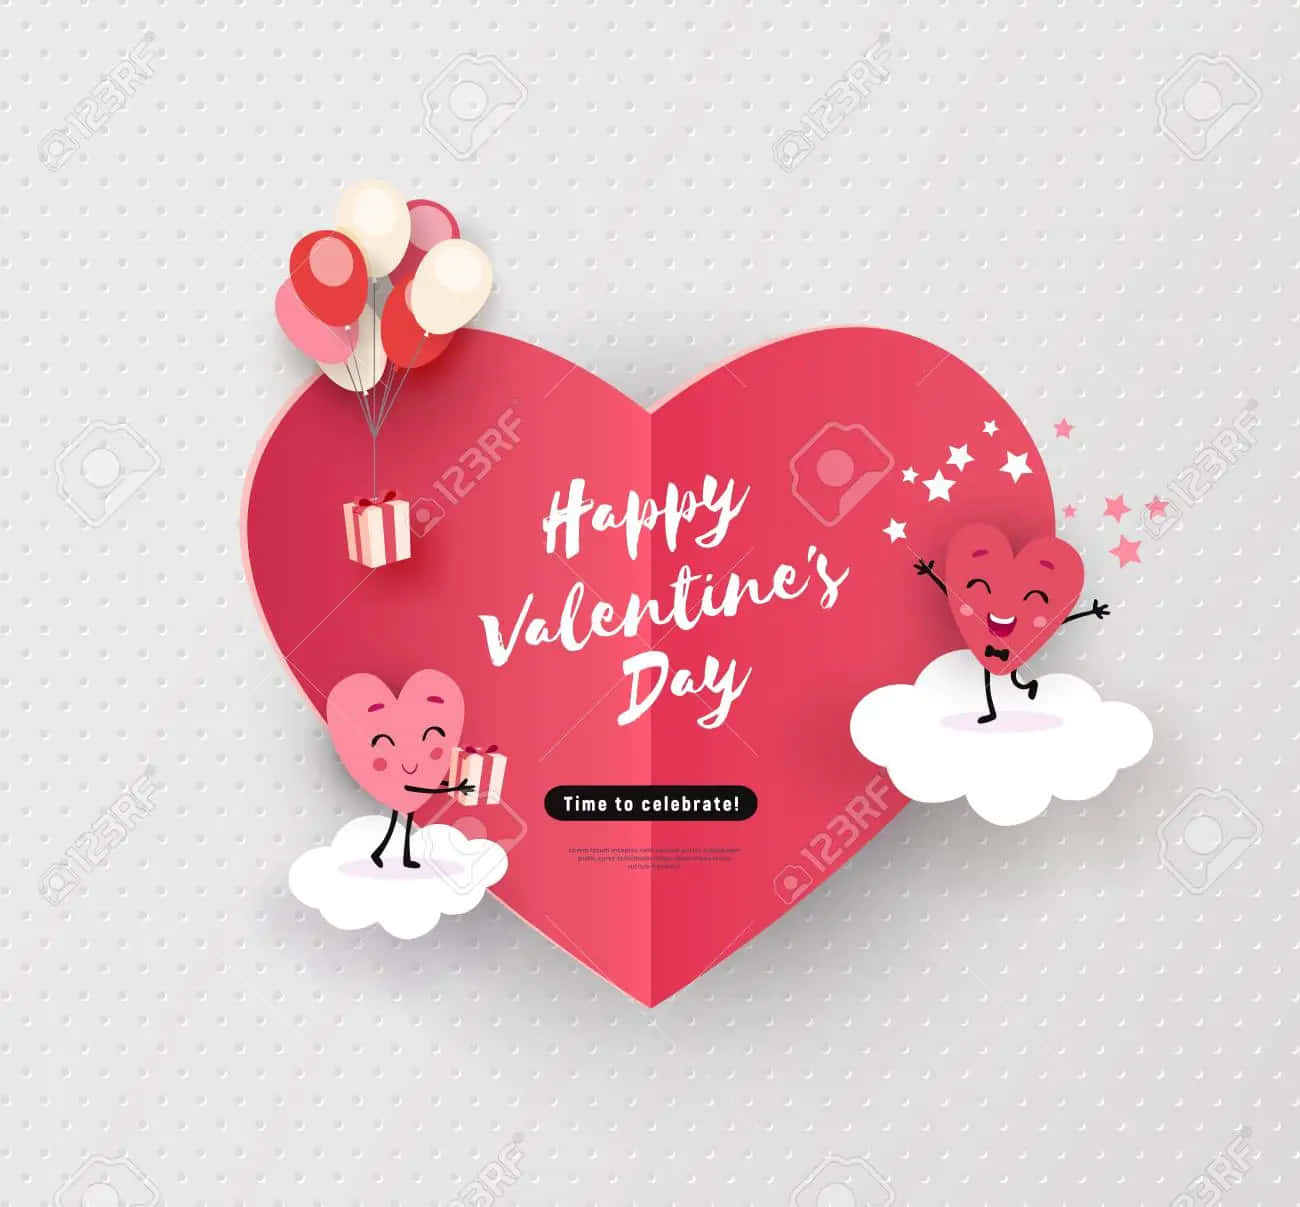 Happy Valentine Day Card With Hearts And Balloons Wallpaper